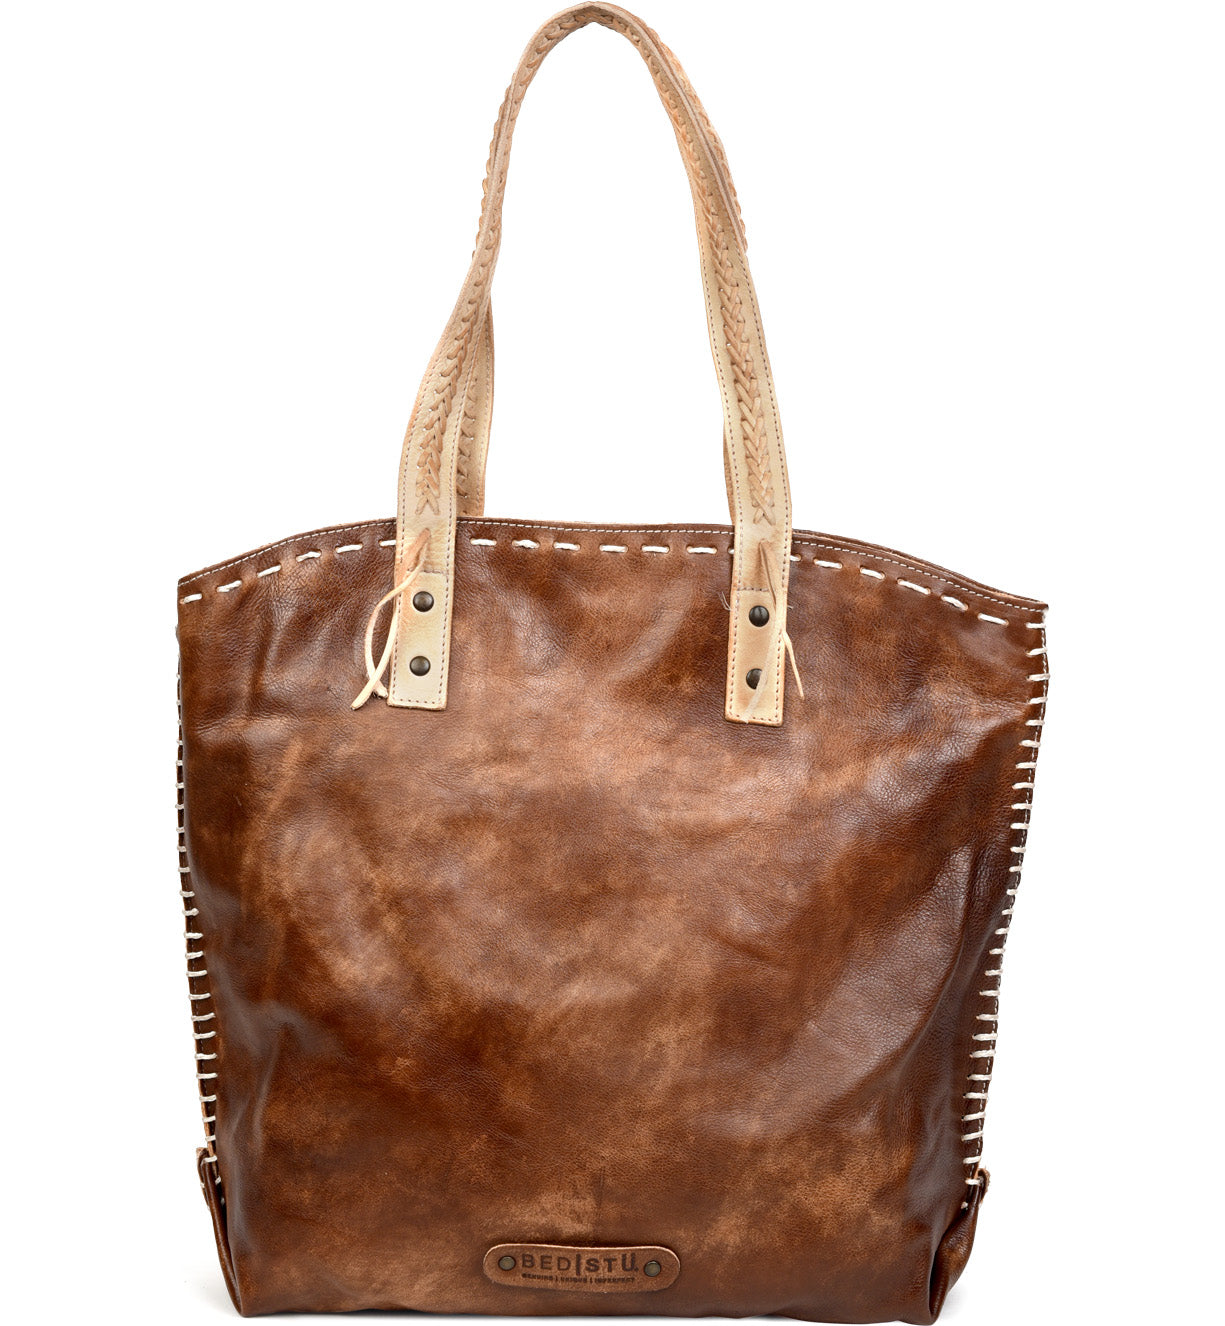 The Barra brown leather tote bag by Bed Stu.